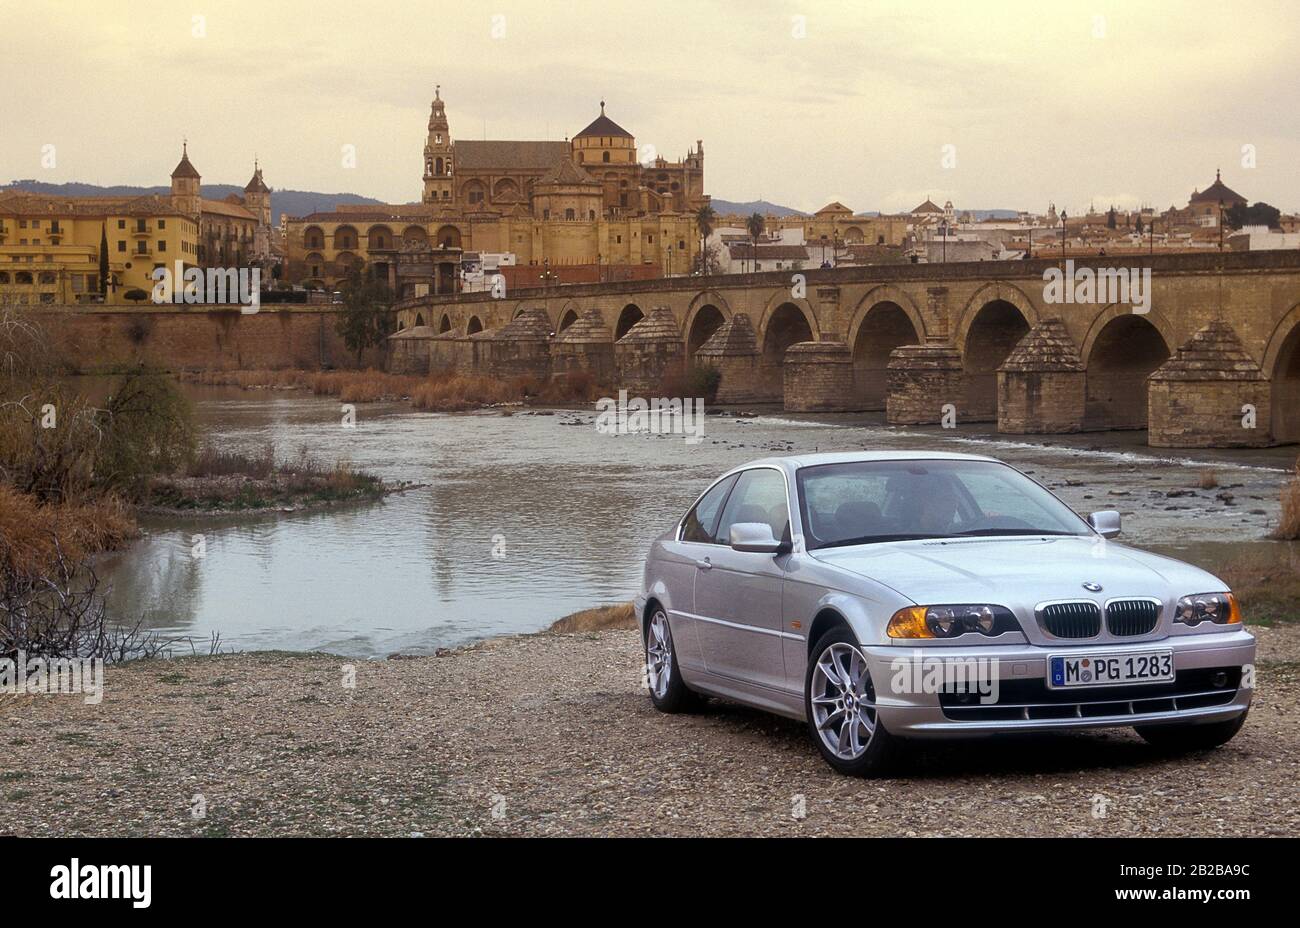 1999 BMW 328 Ci driving in Spain Stock Photo